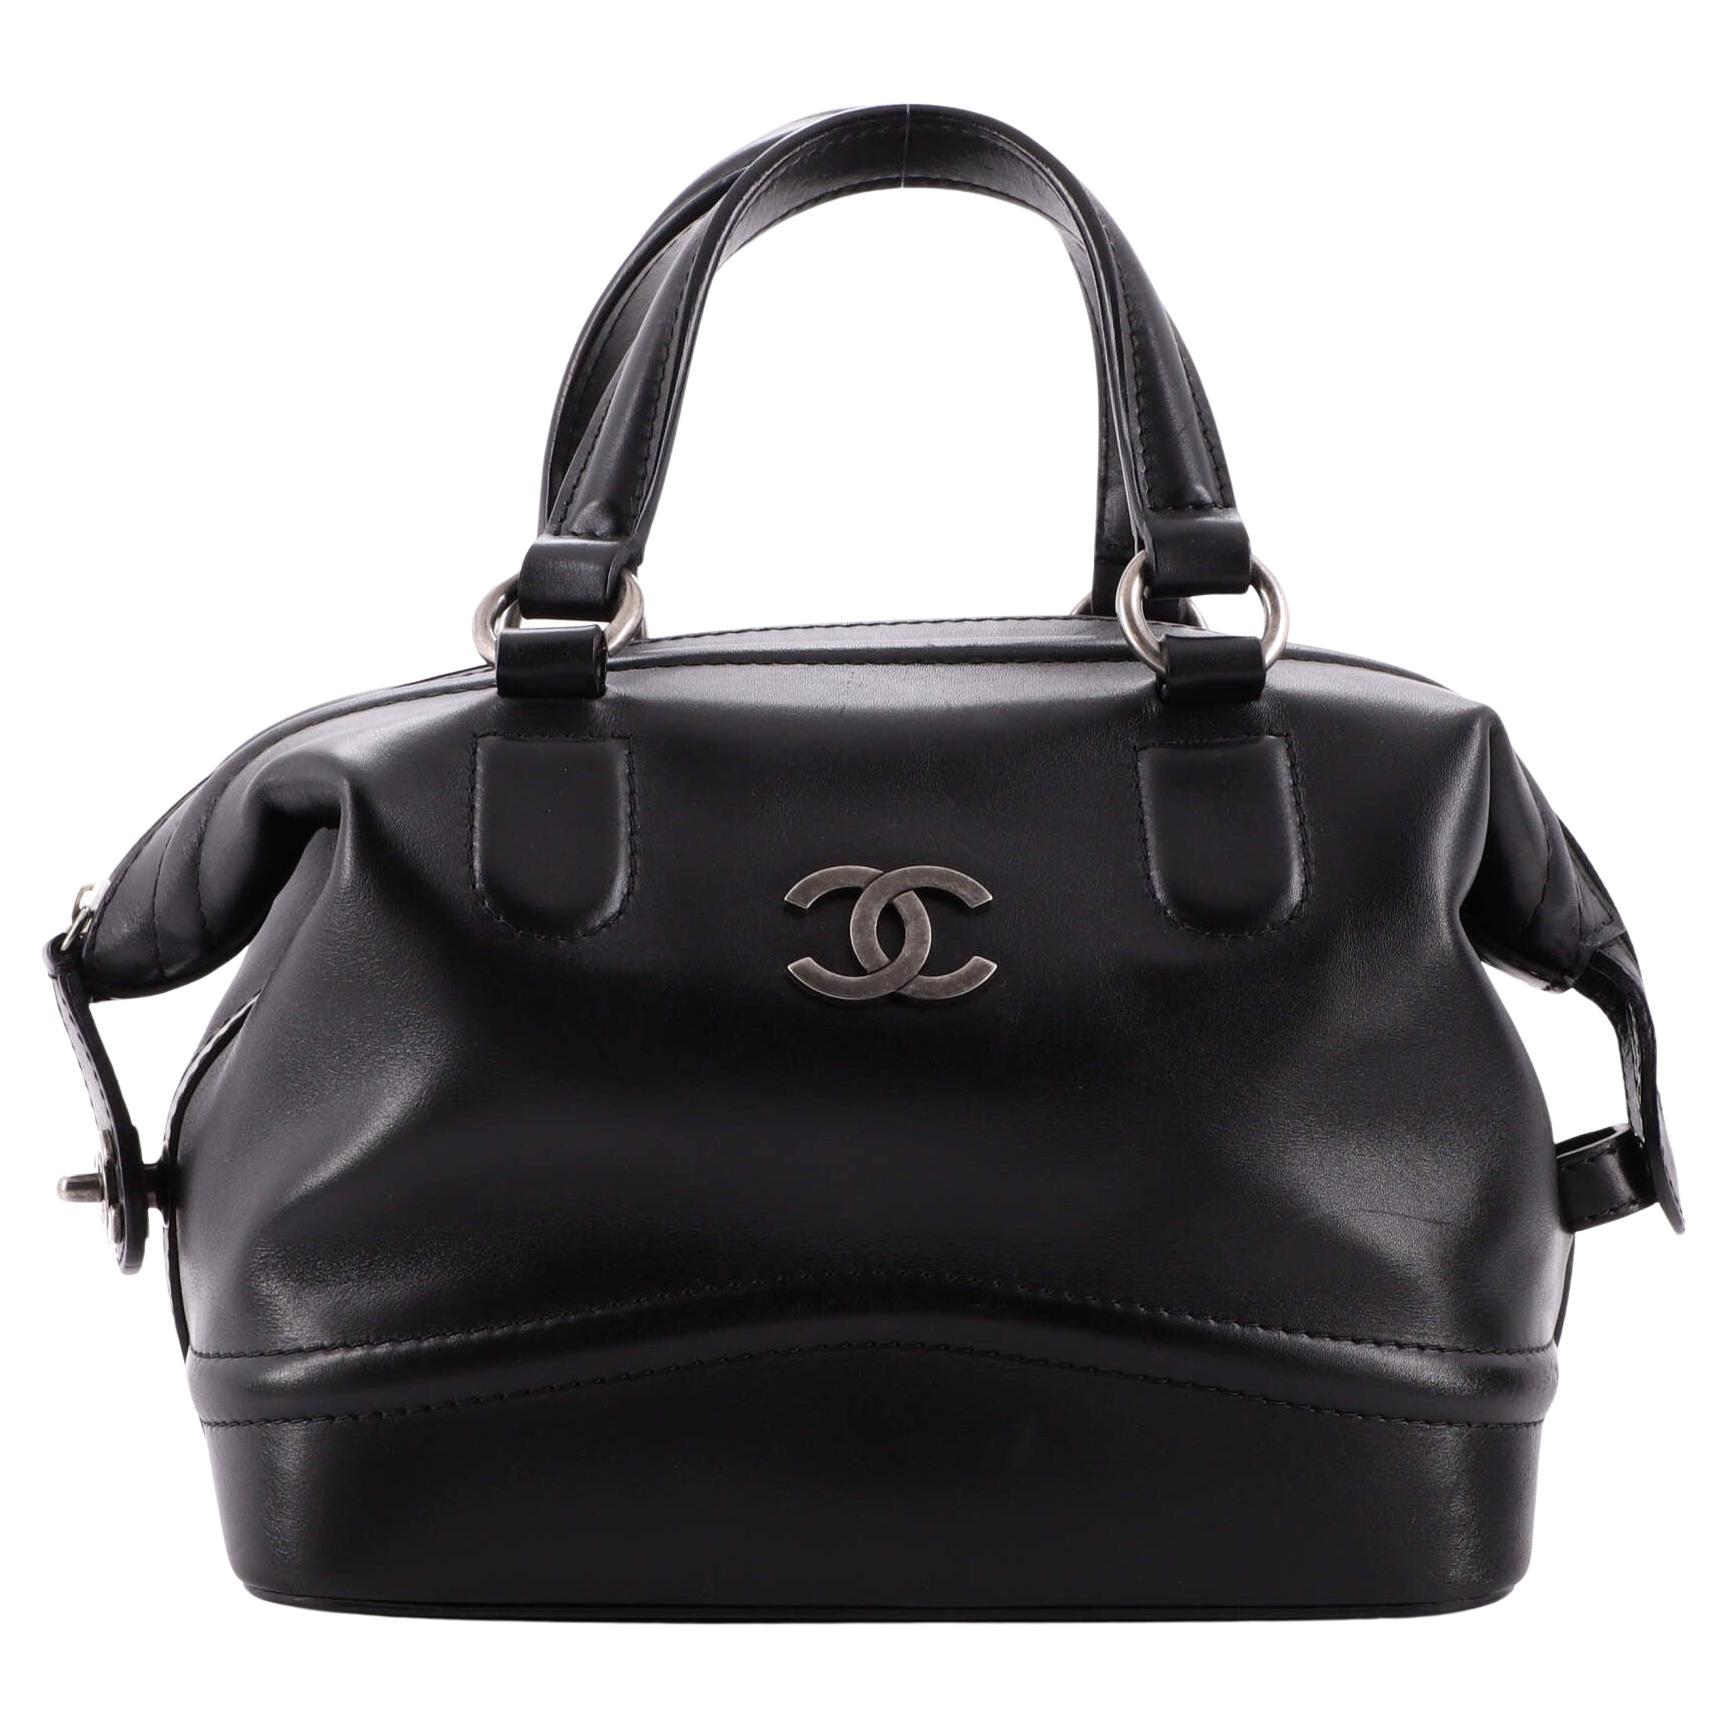 Chanel 2007 Vintage Calfskin Satchel Bowler Medium Tote Bag  In Good Condition For Sale In Miami, FL